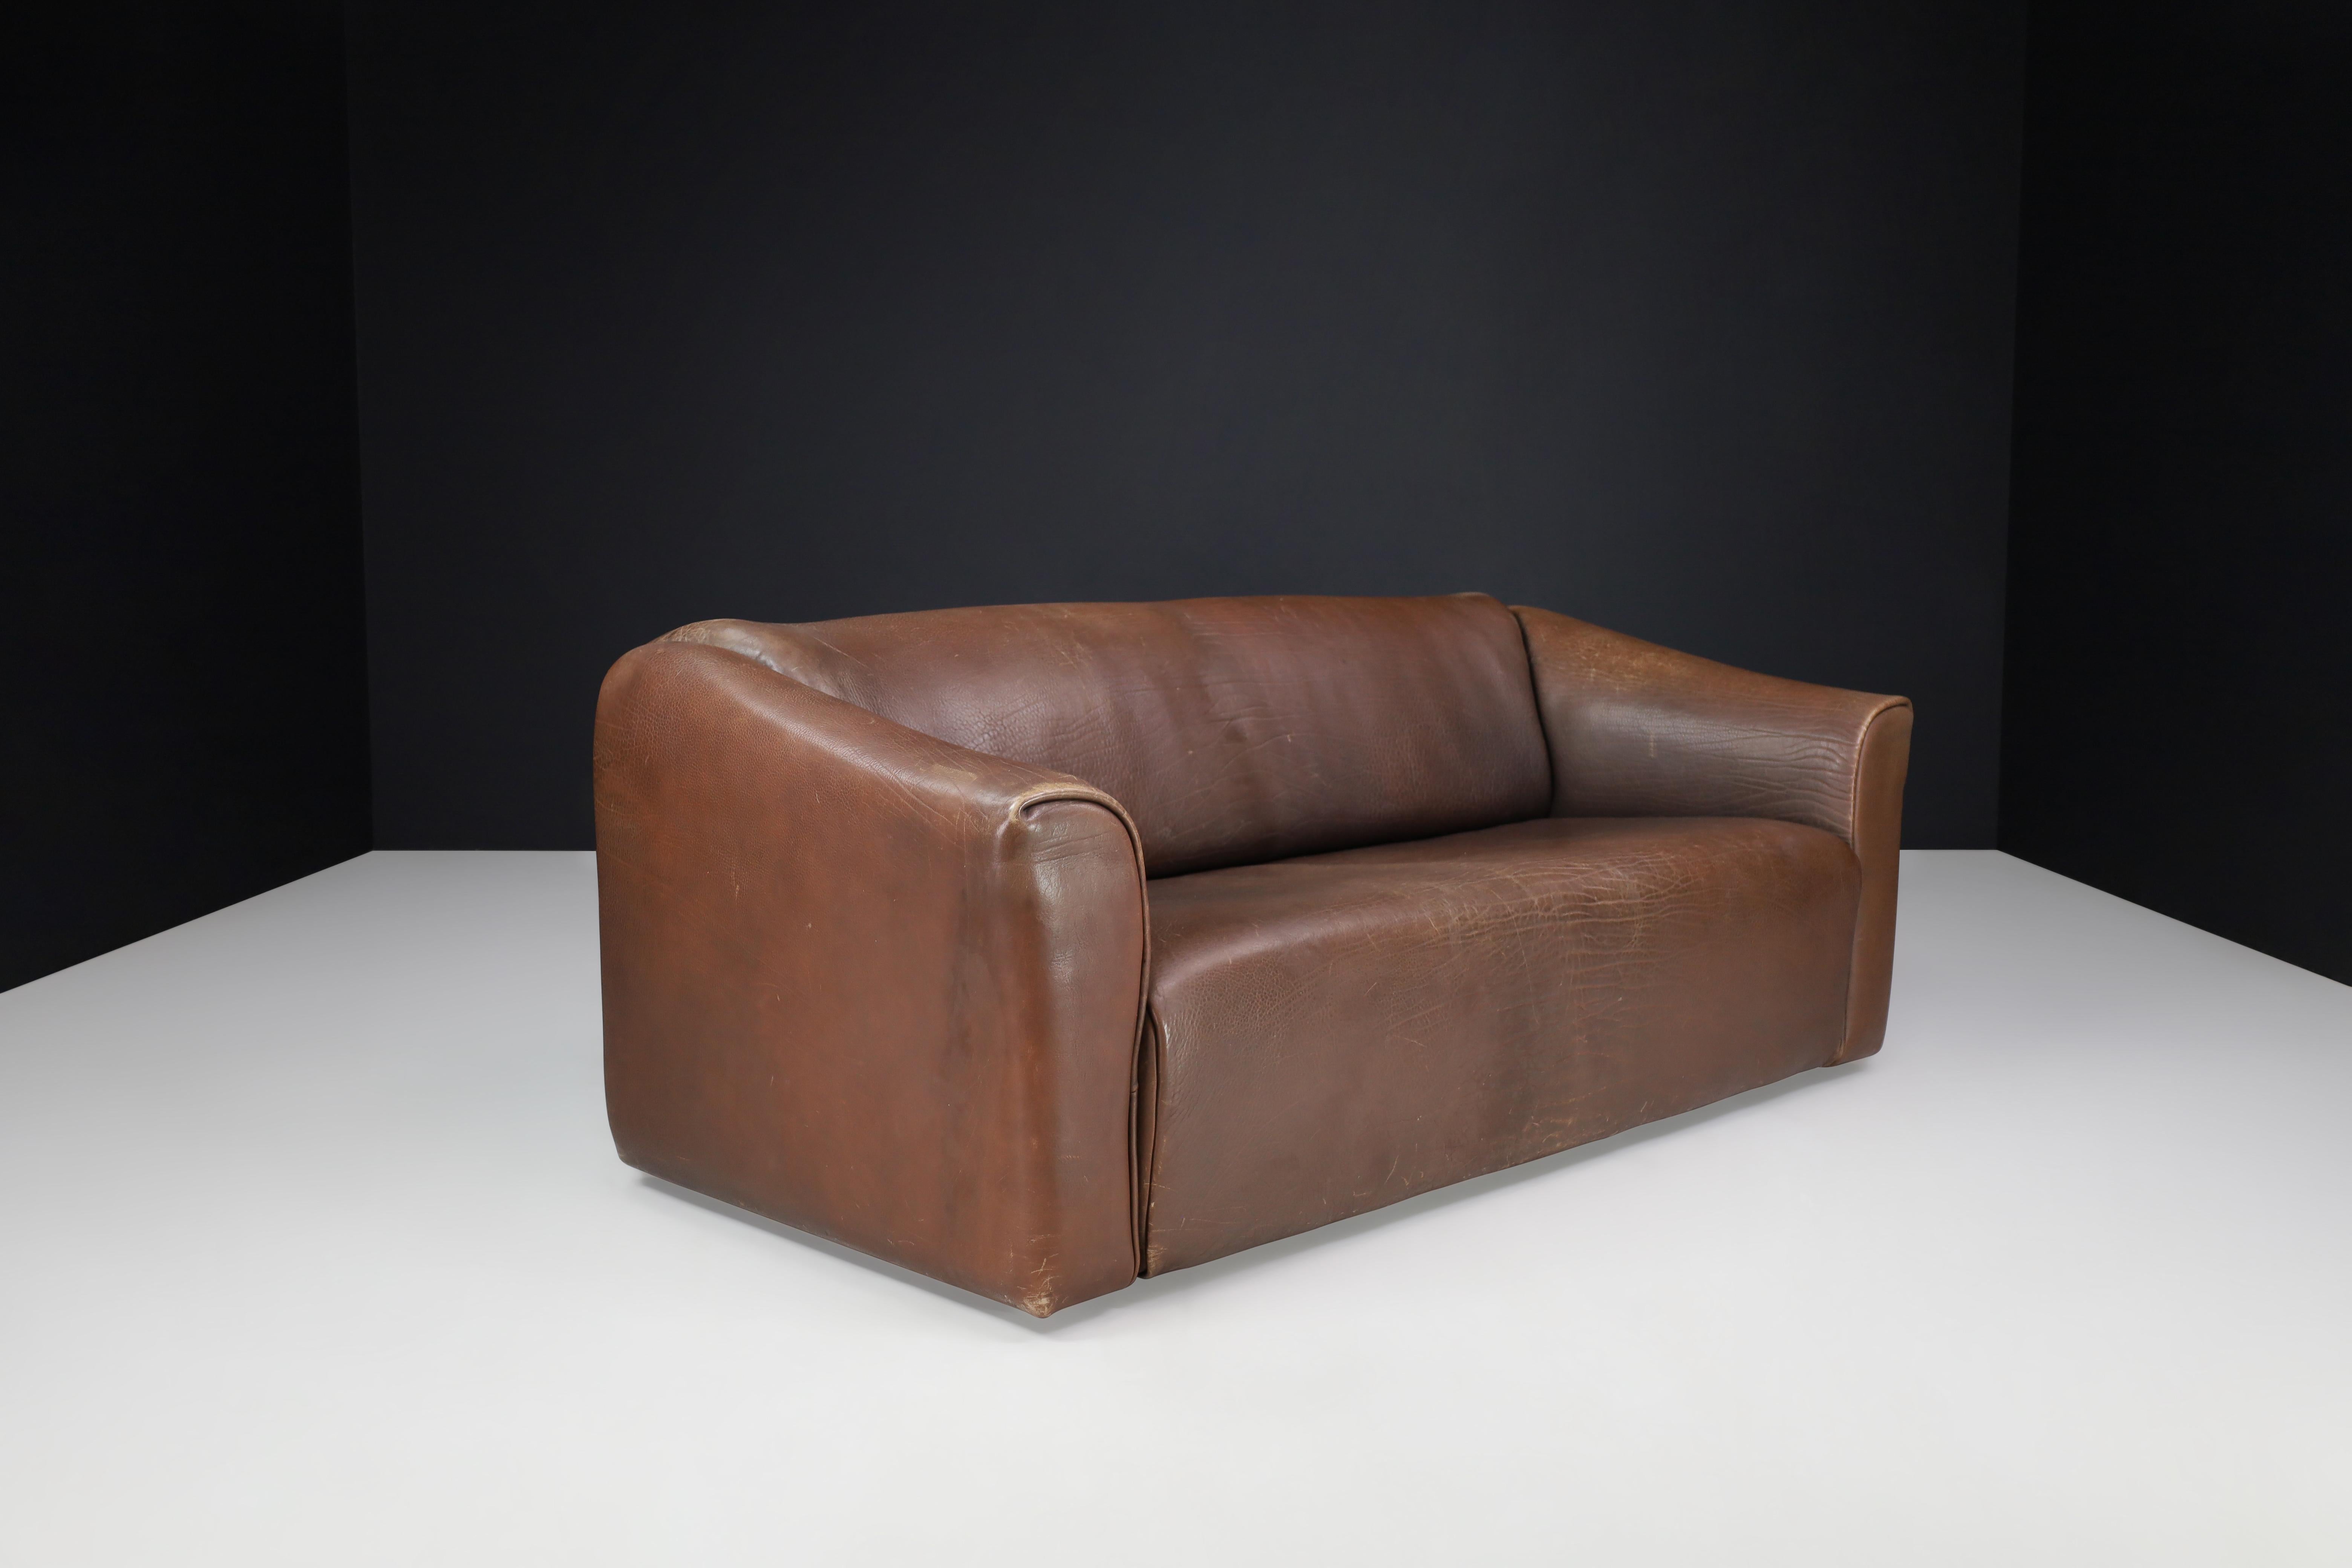 De Sede DS-47 neck leather sofa from Switzerland 1970s 

Experience the remarkable De Sede DS-47 Neck Leather Sofa from Switzerland, skillfully crafted in the 1970s. This sturdy and comfortable sofa is made with 5mm thick NECK leather, boasting